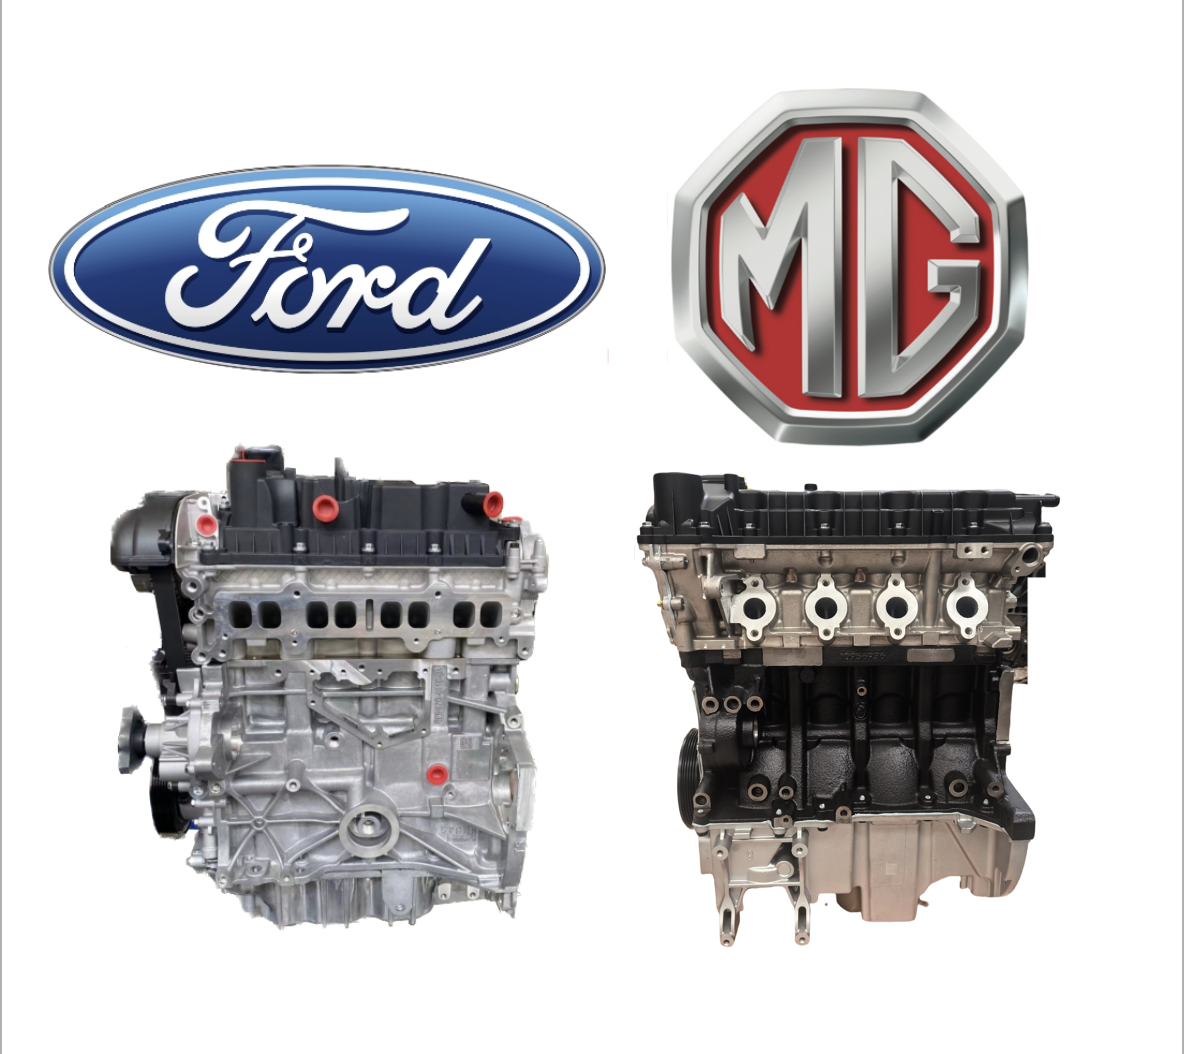 FORD & MG ENGINES